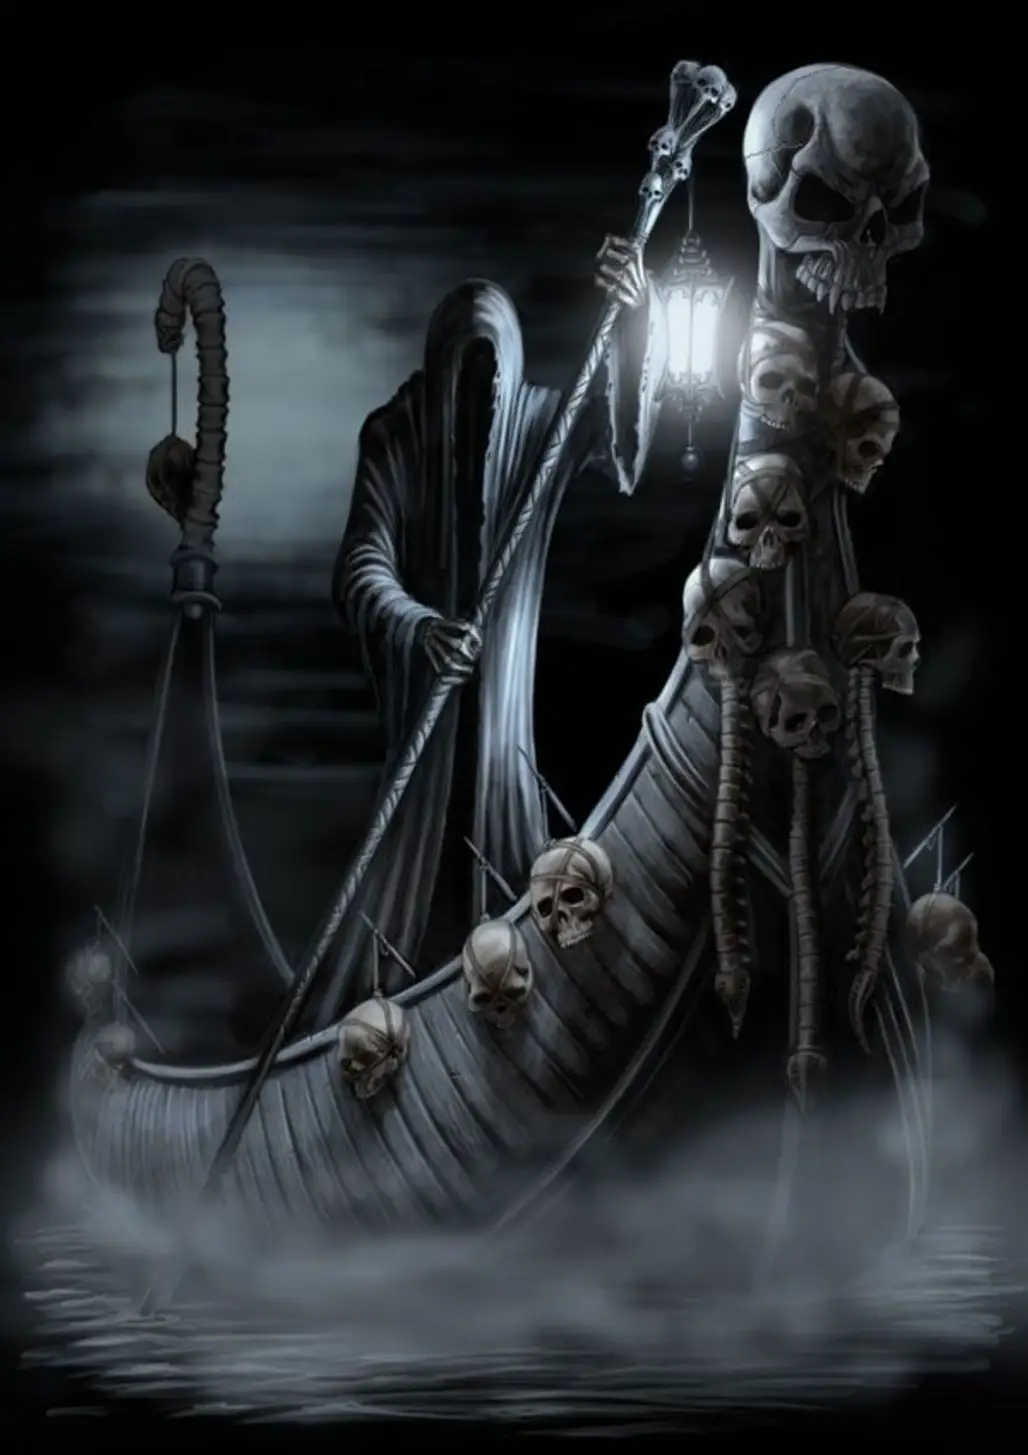 Charon - Ferryman of the River Styx